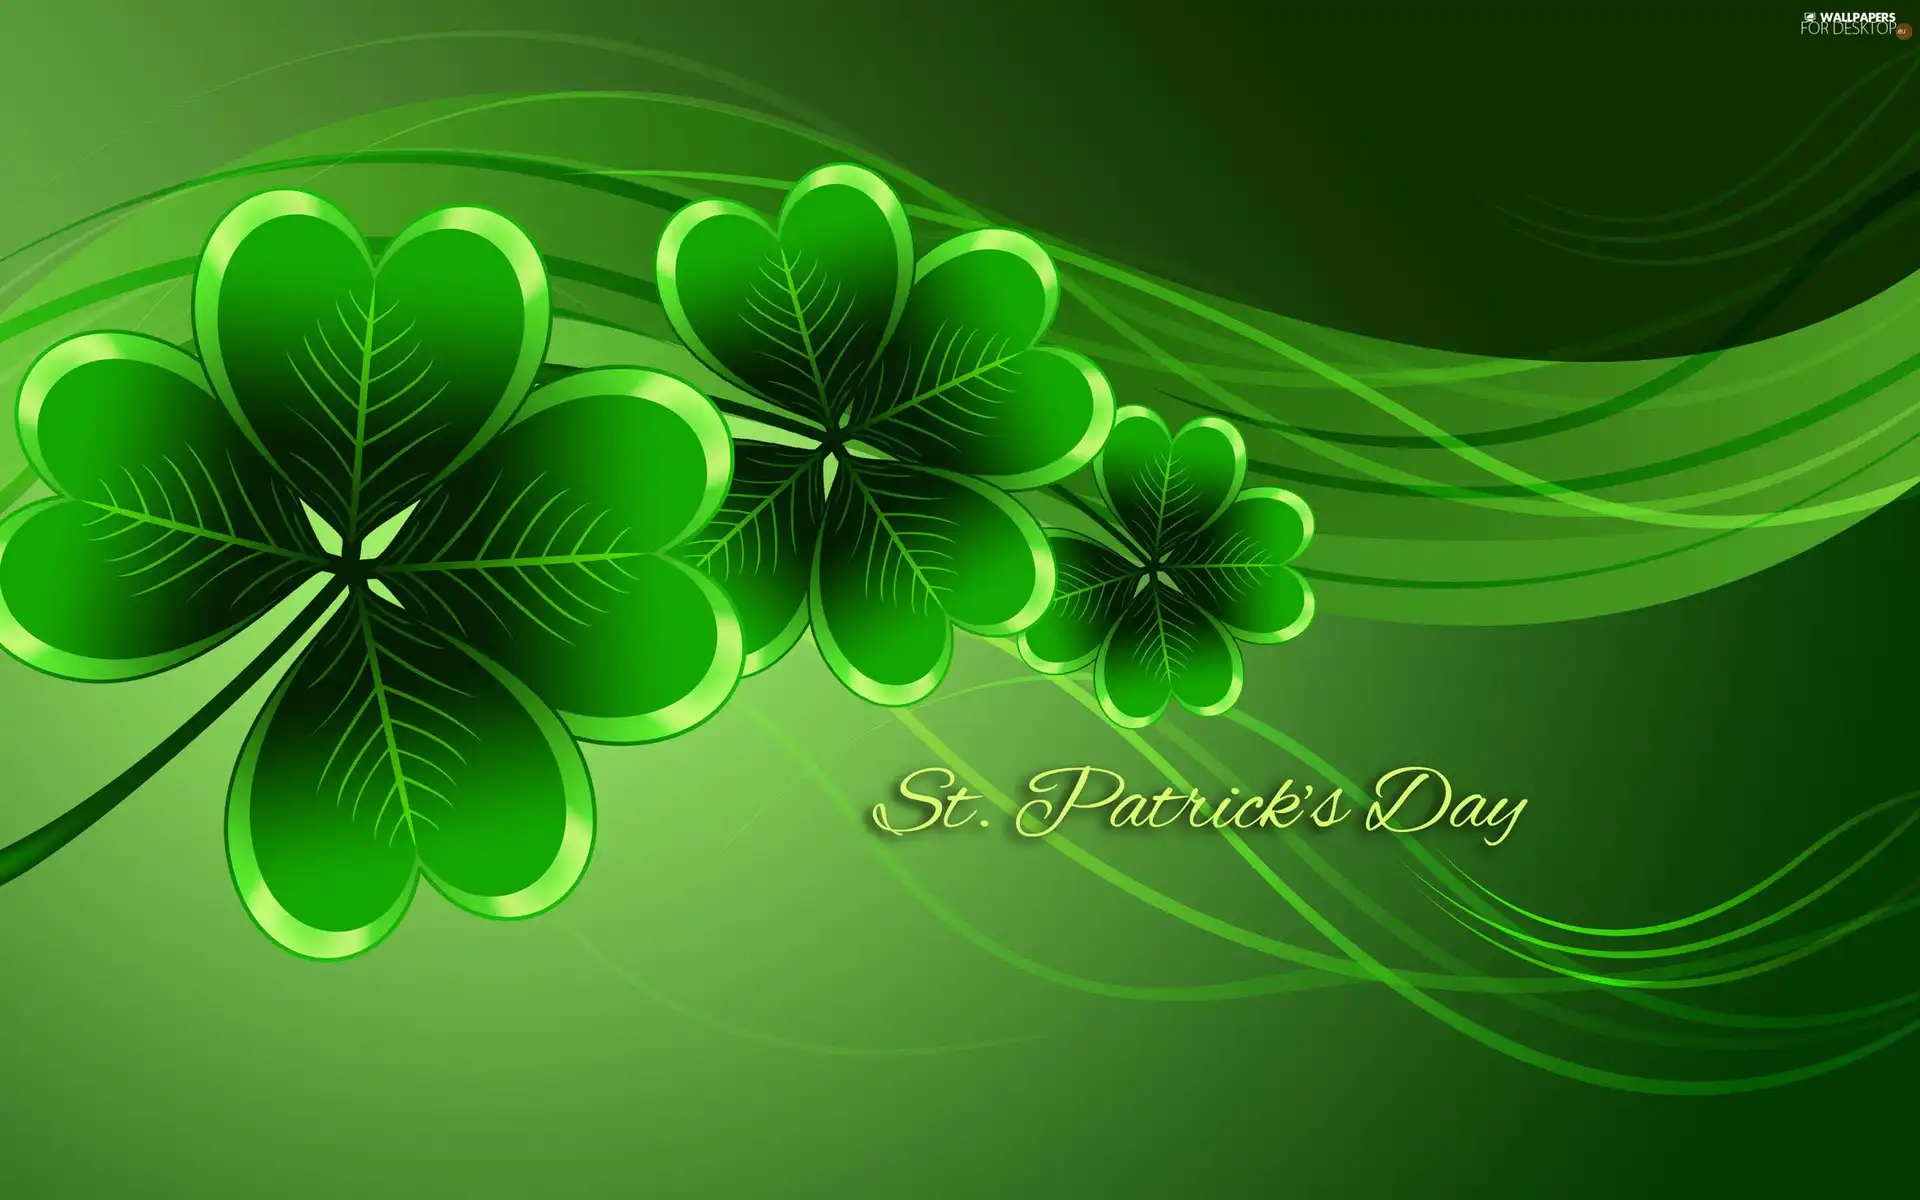 Clovers, St. Patrick Day, text